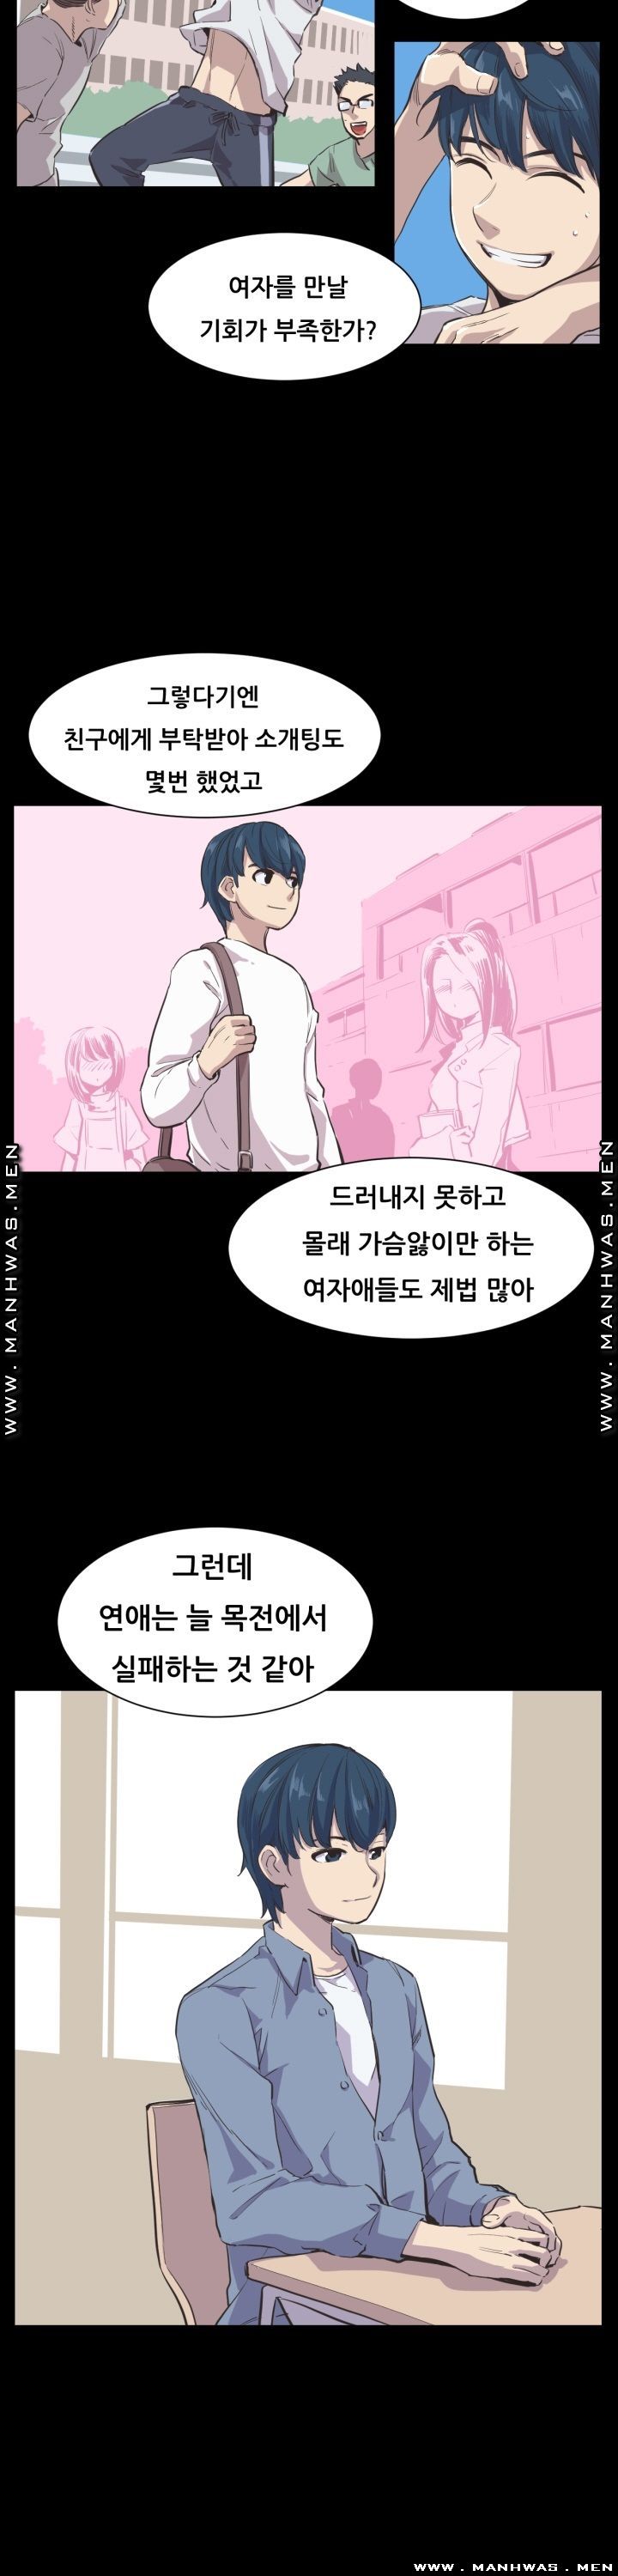 Innocent Man and Women Raw - Chapter 2 Page 4